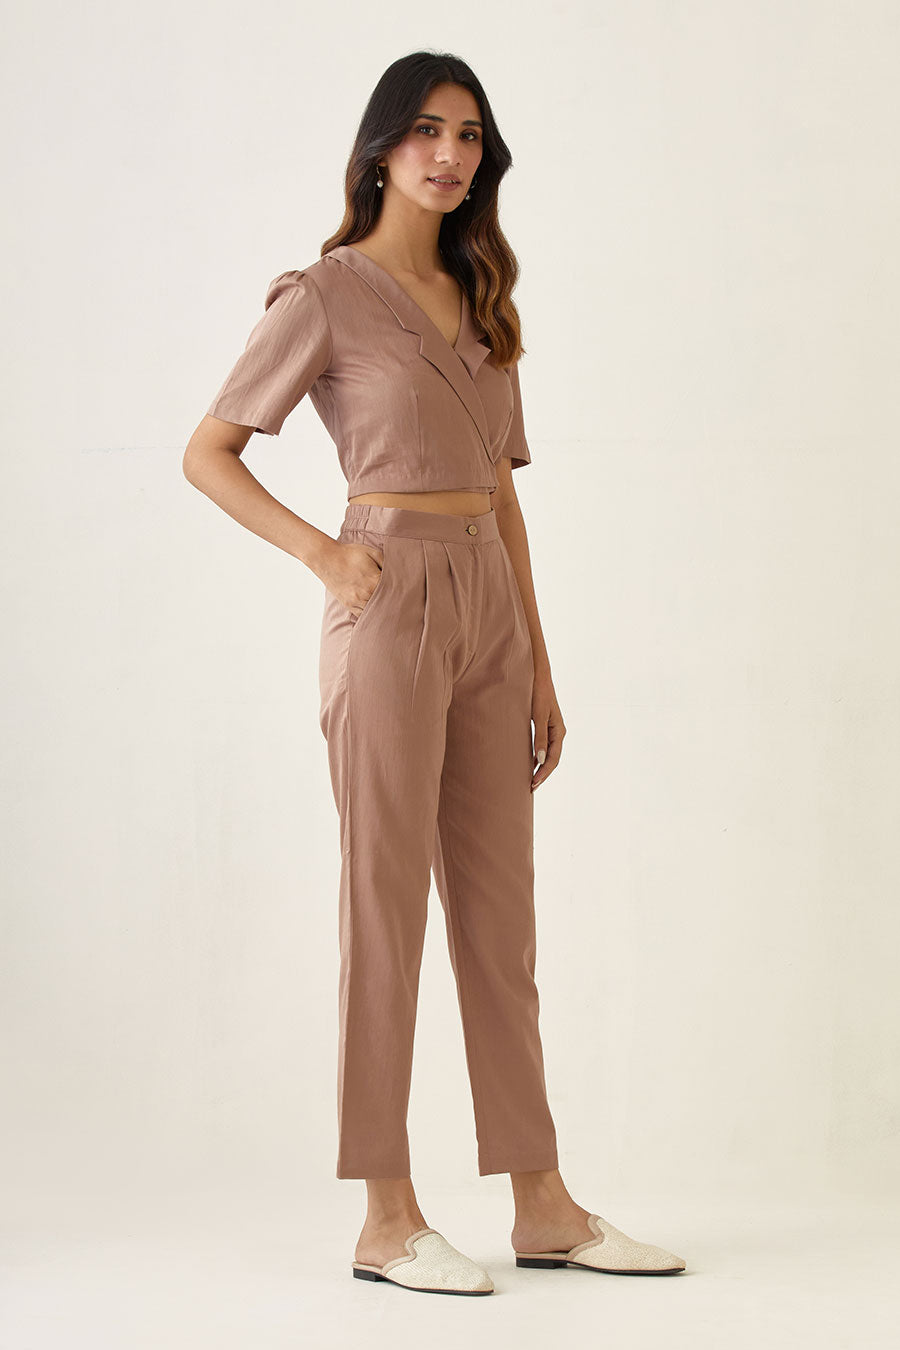 Taupe Crop Top with Pleated Pant Co-ord Set